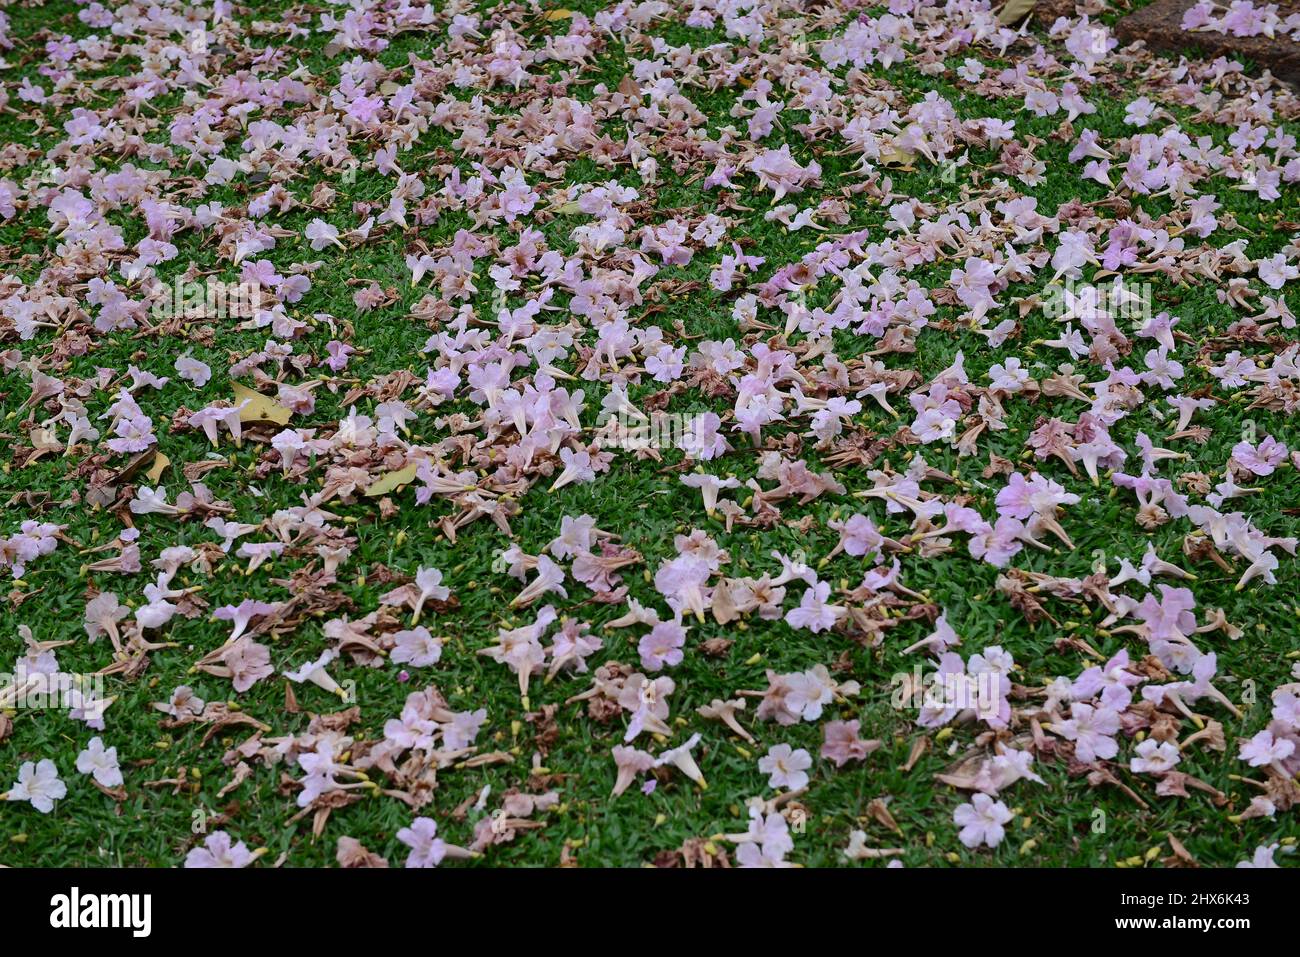 Tabebuia rosea flower on the grass Stock Photo